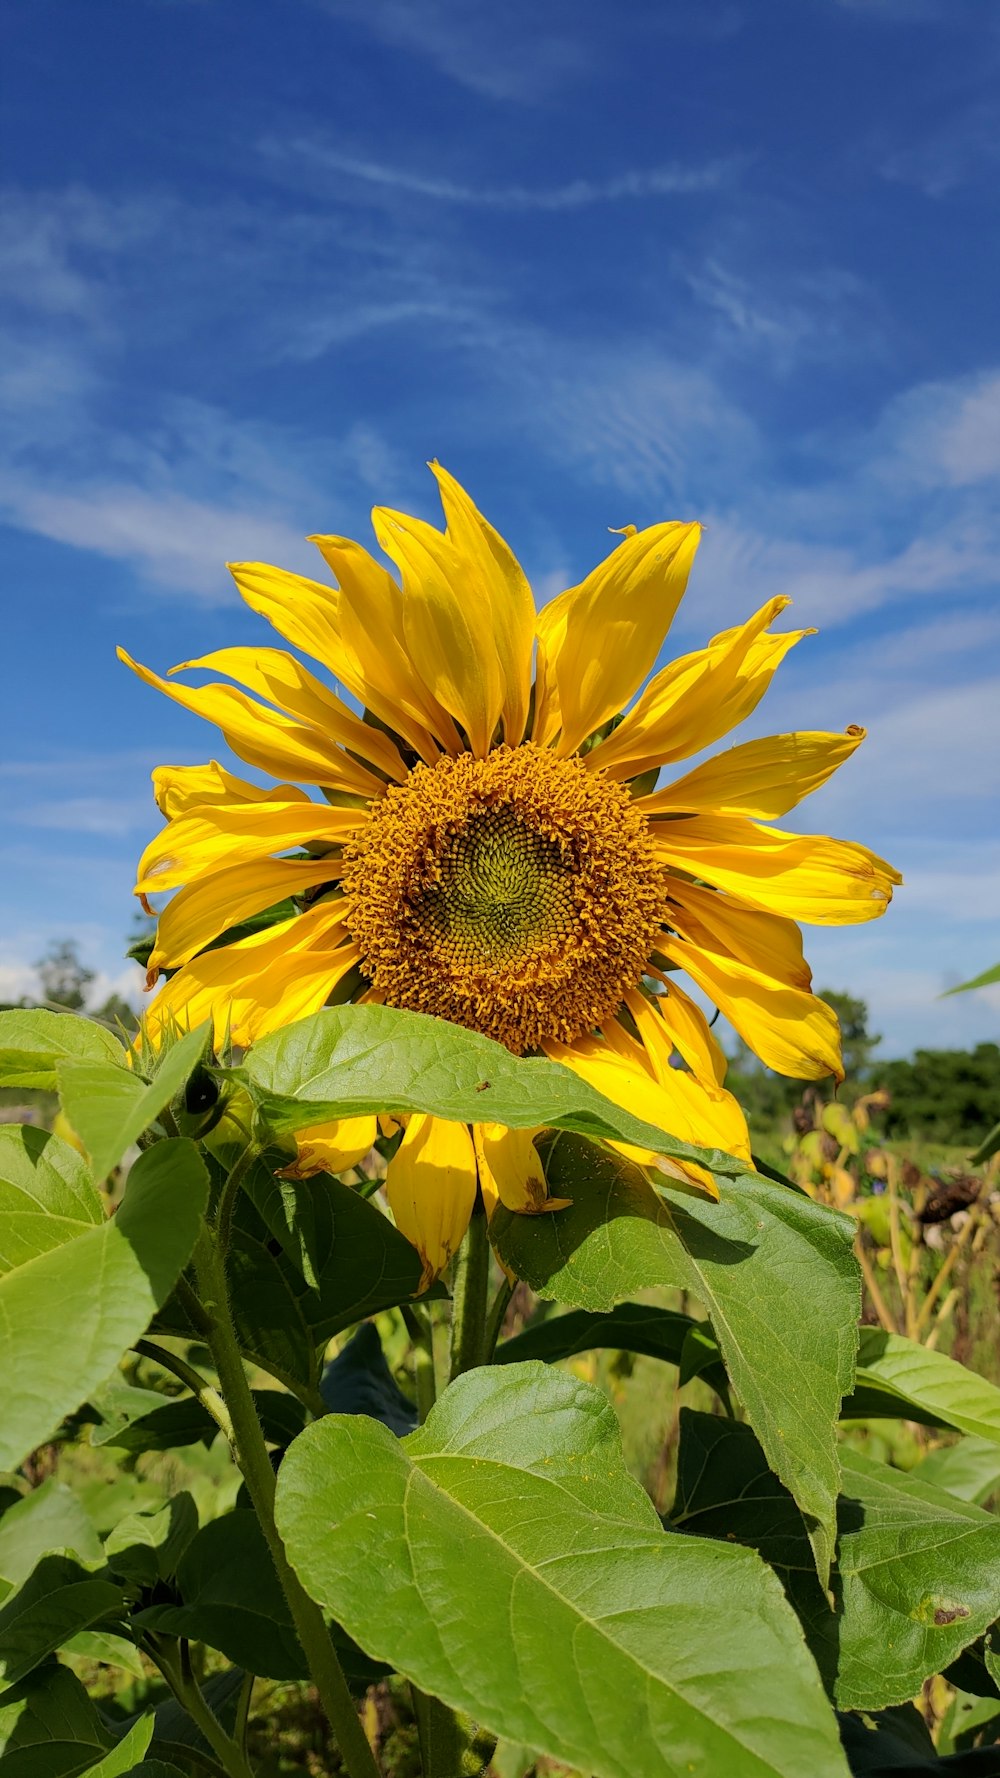 a large sunflower in a field with a blue sky in the background